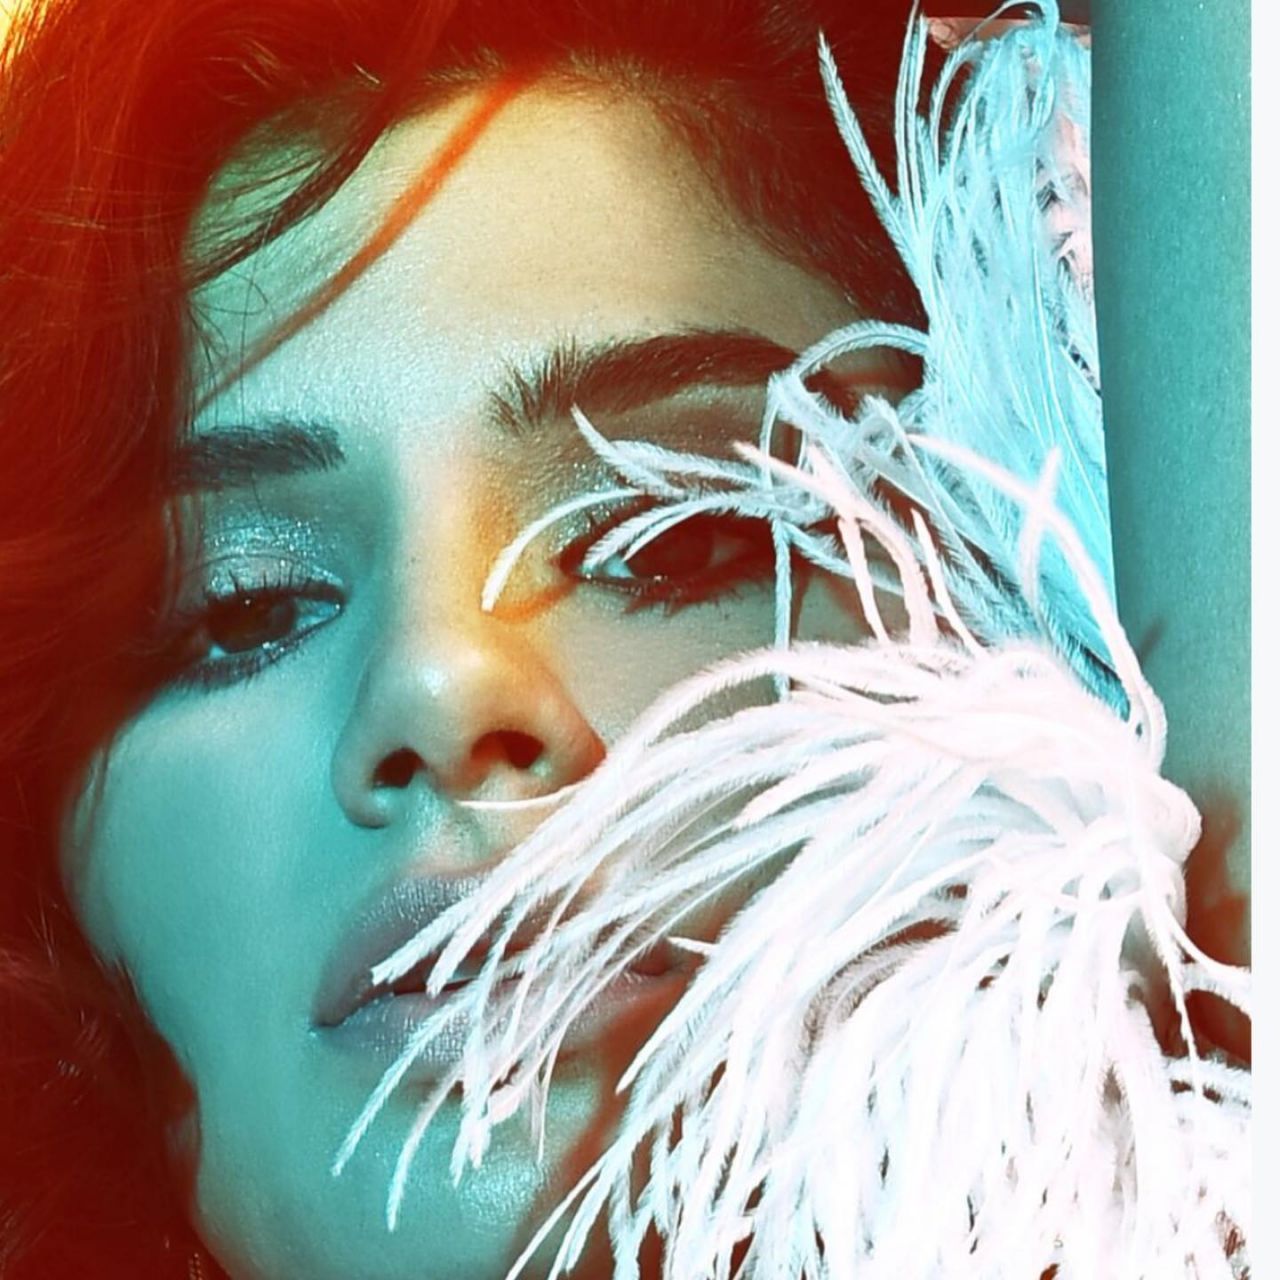 Diane Guerrero - Photoshoot for A Book Of, August 2019.